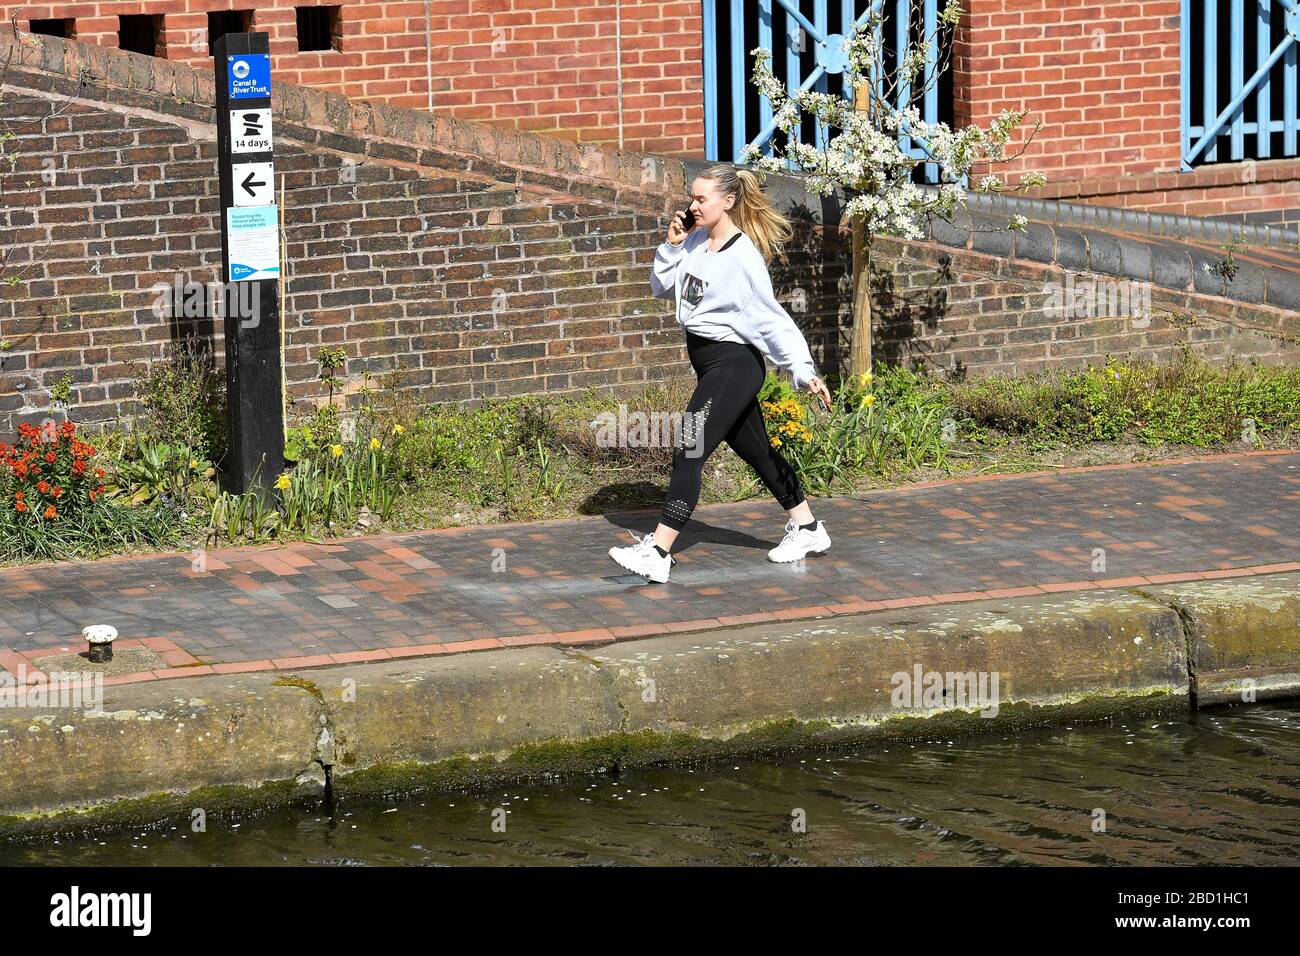 A woman walks by an information sign highlighting preventive measures against Covid19 on a canal in Birmingham city centre, as the Canal and River Trust has started putting up signs warning people to limit use of canal towpaths and have regard for social distancing. Stock Photo